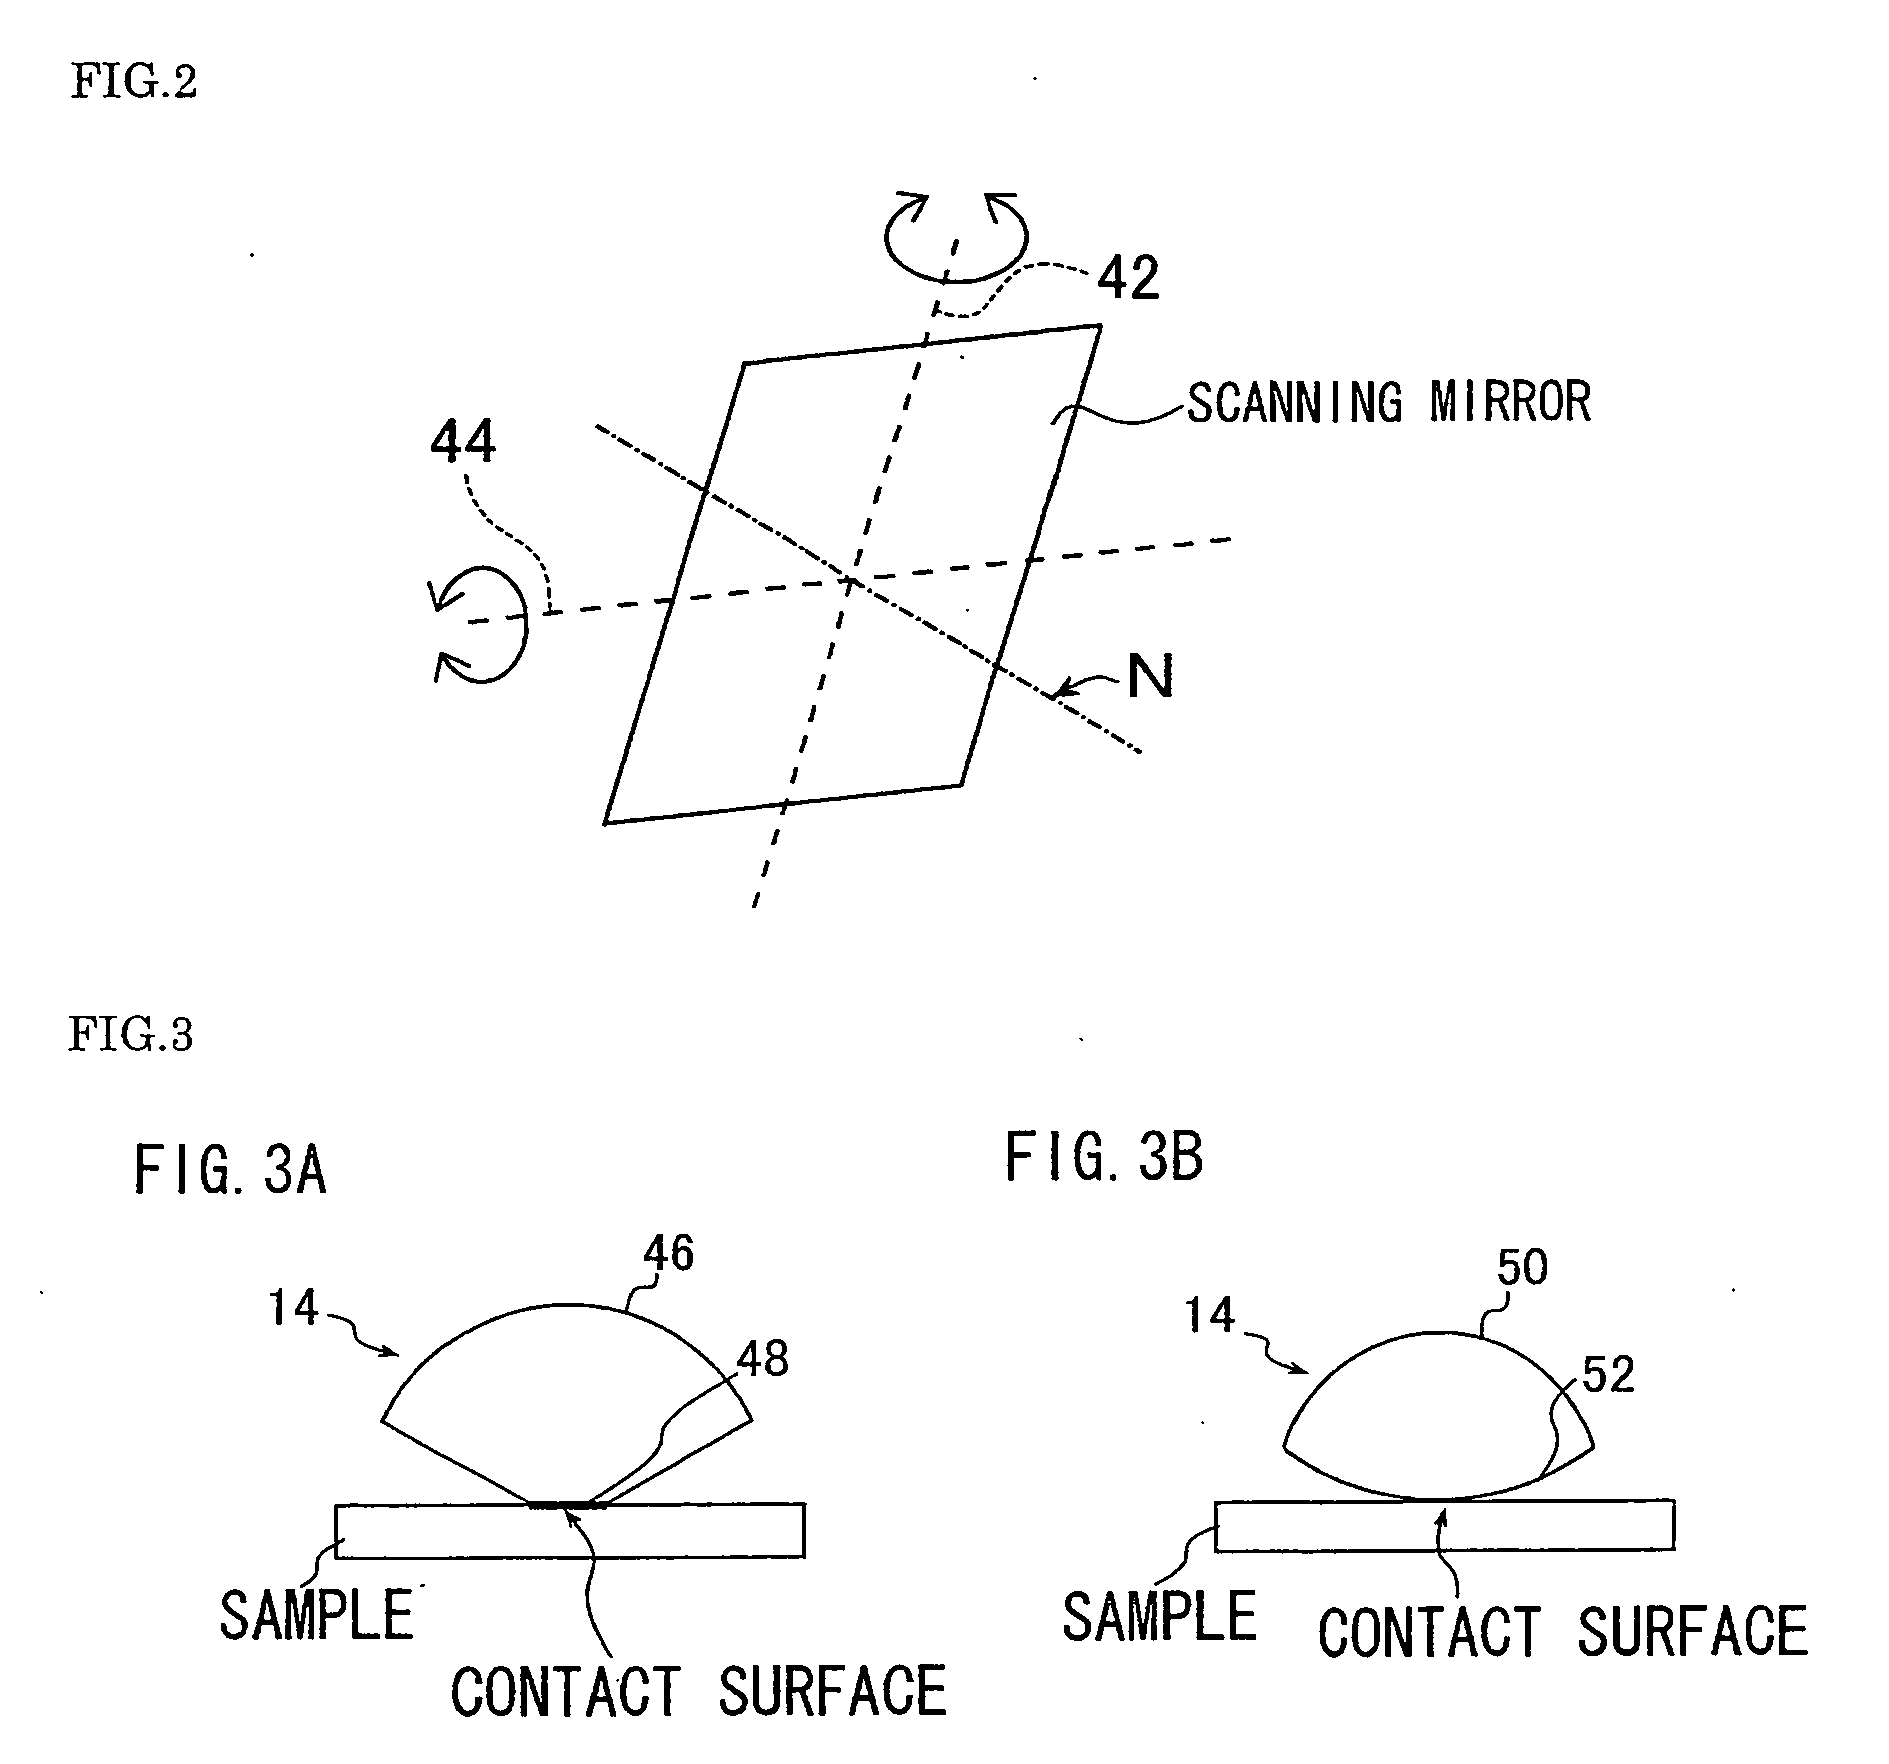 Attenuated-total-reflection measurement apparatus